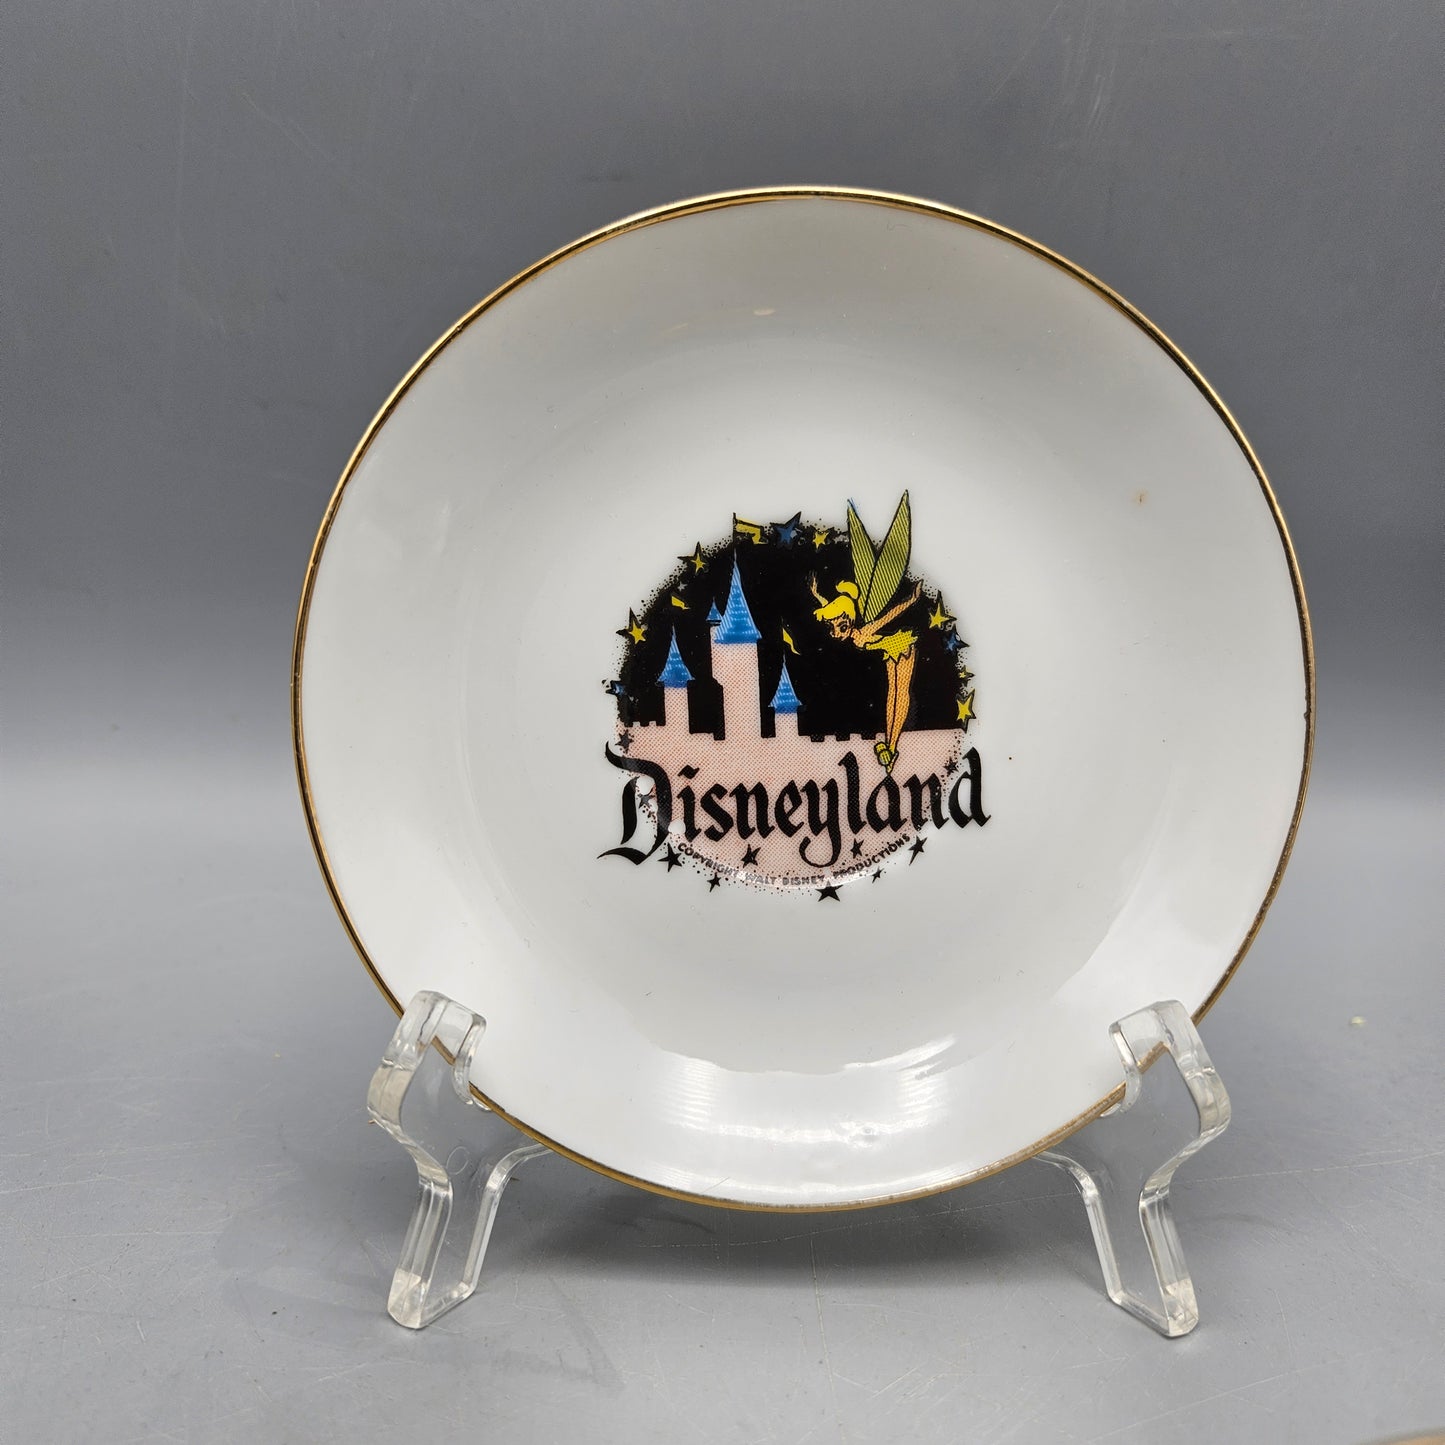 1950s Eleanore Welborn Porcelain Disneyland Tinkerbell Cup and Saucer